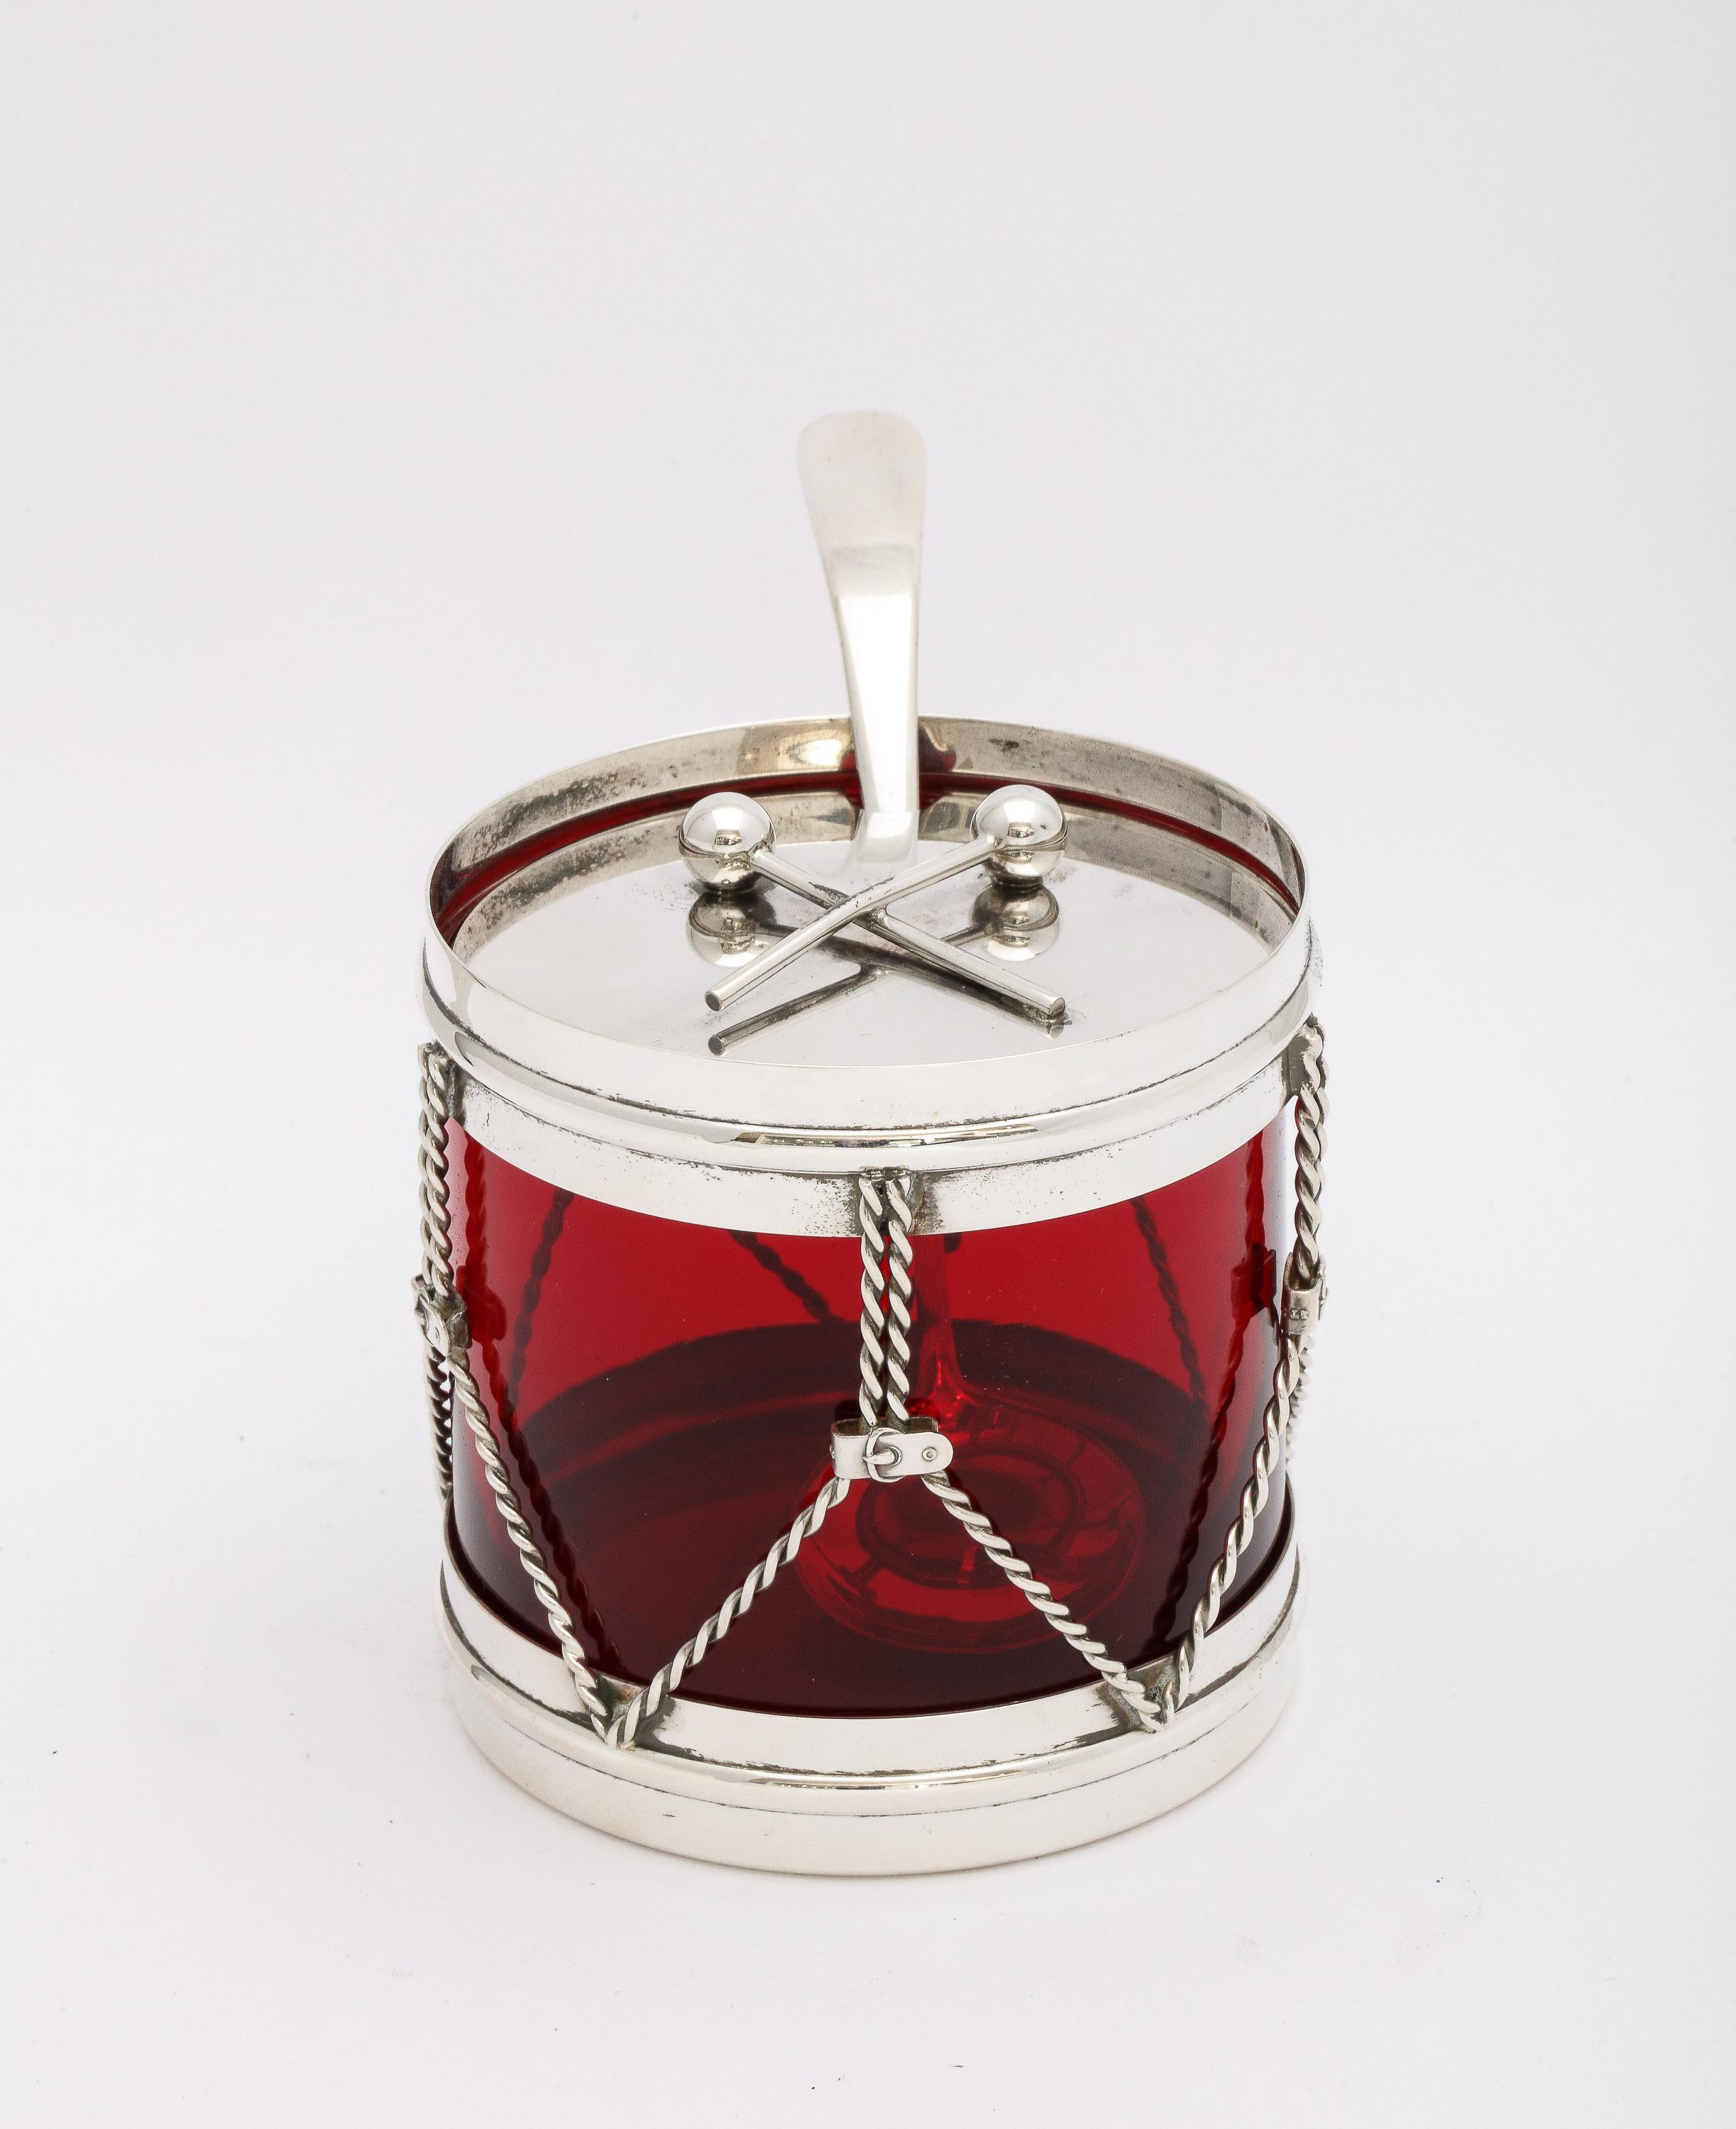 Mid-20th Century Art Deco Sterling and Ruby Glass Drum-Form Condiments Jar With Original Spoon